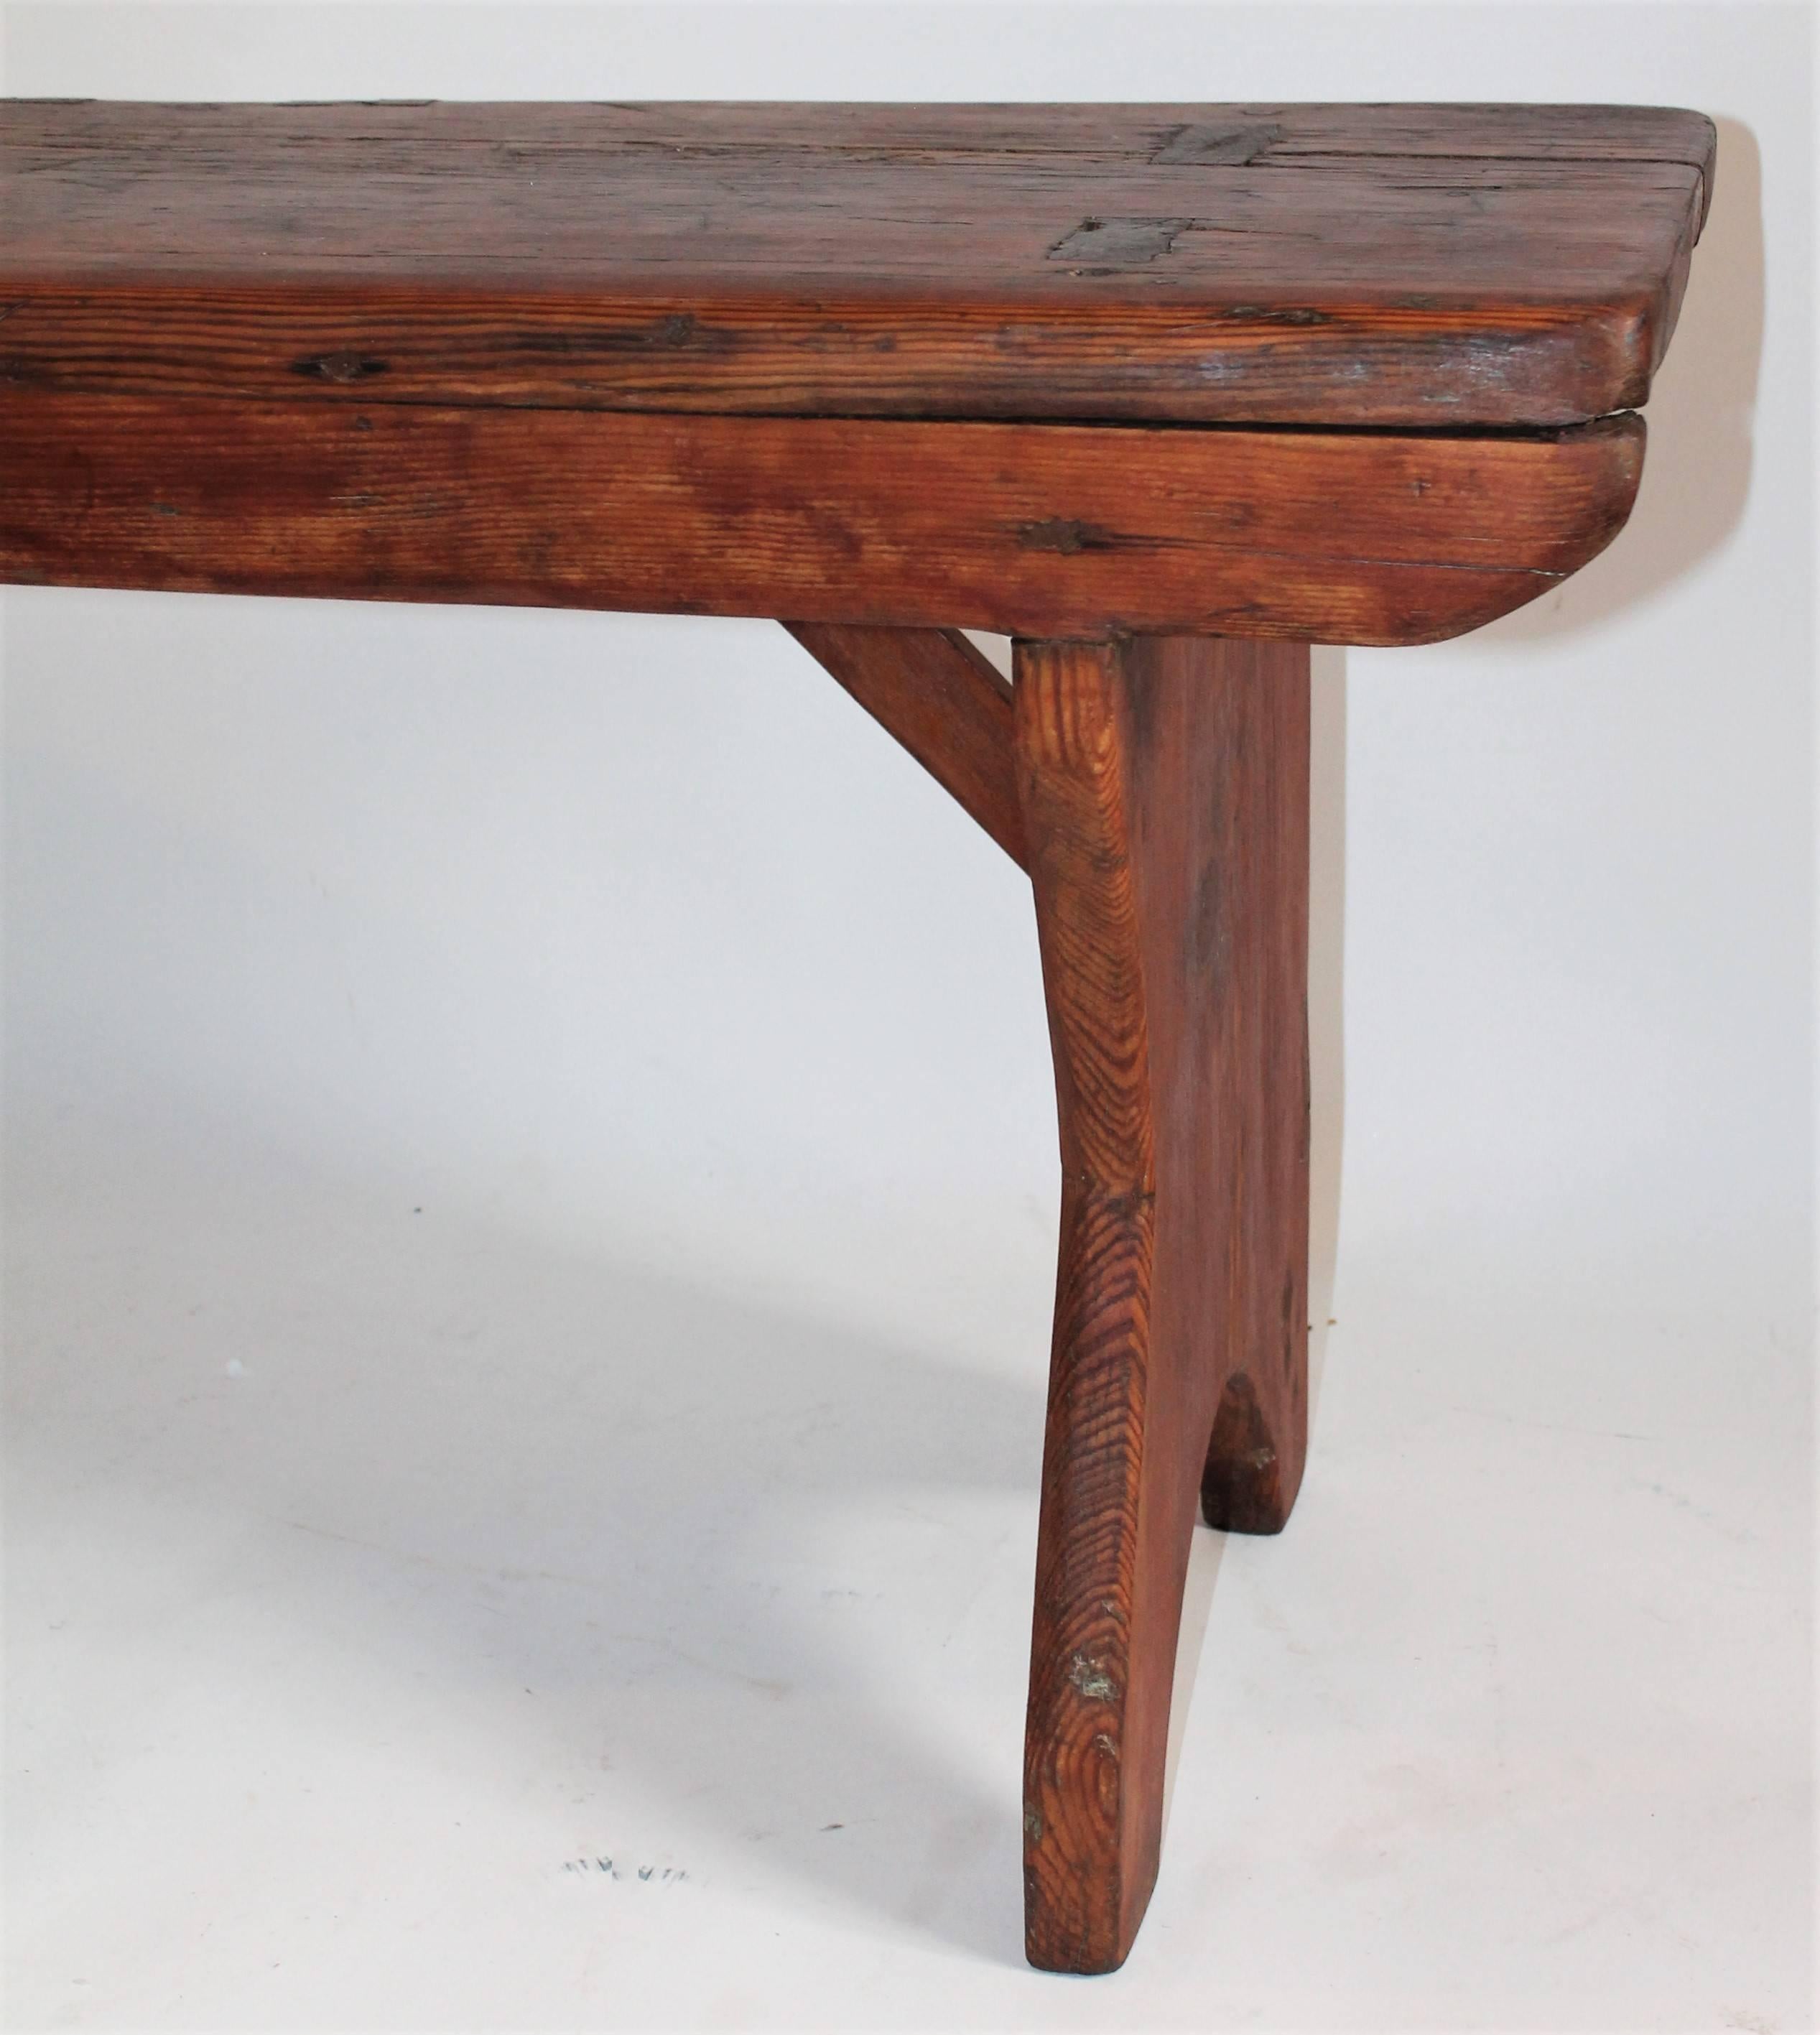 Hand-Crafted 19th Century Rustic Farm House Bench from Pennsylvania